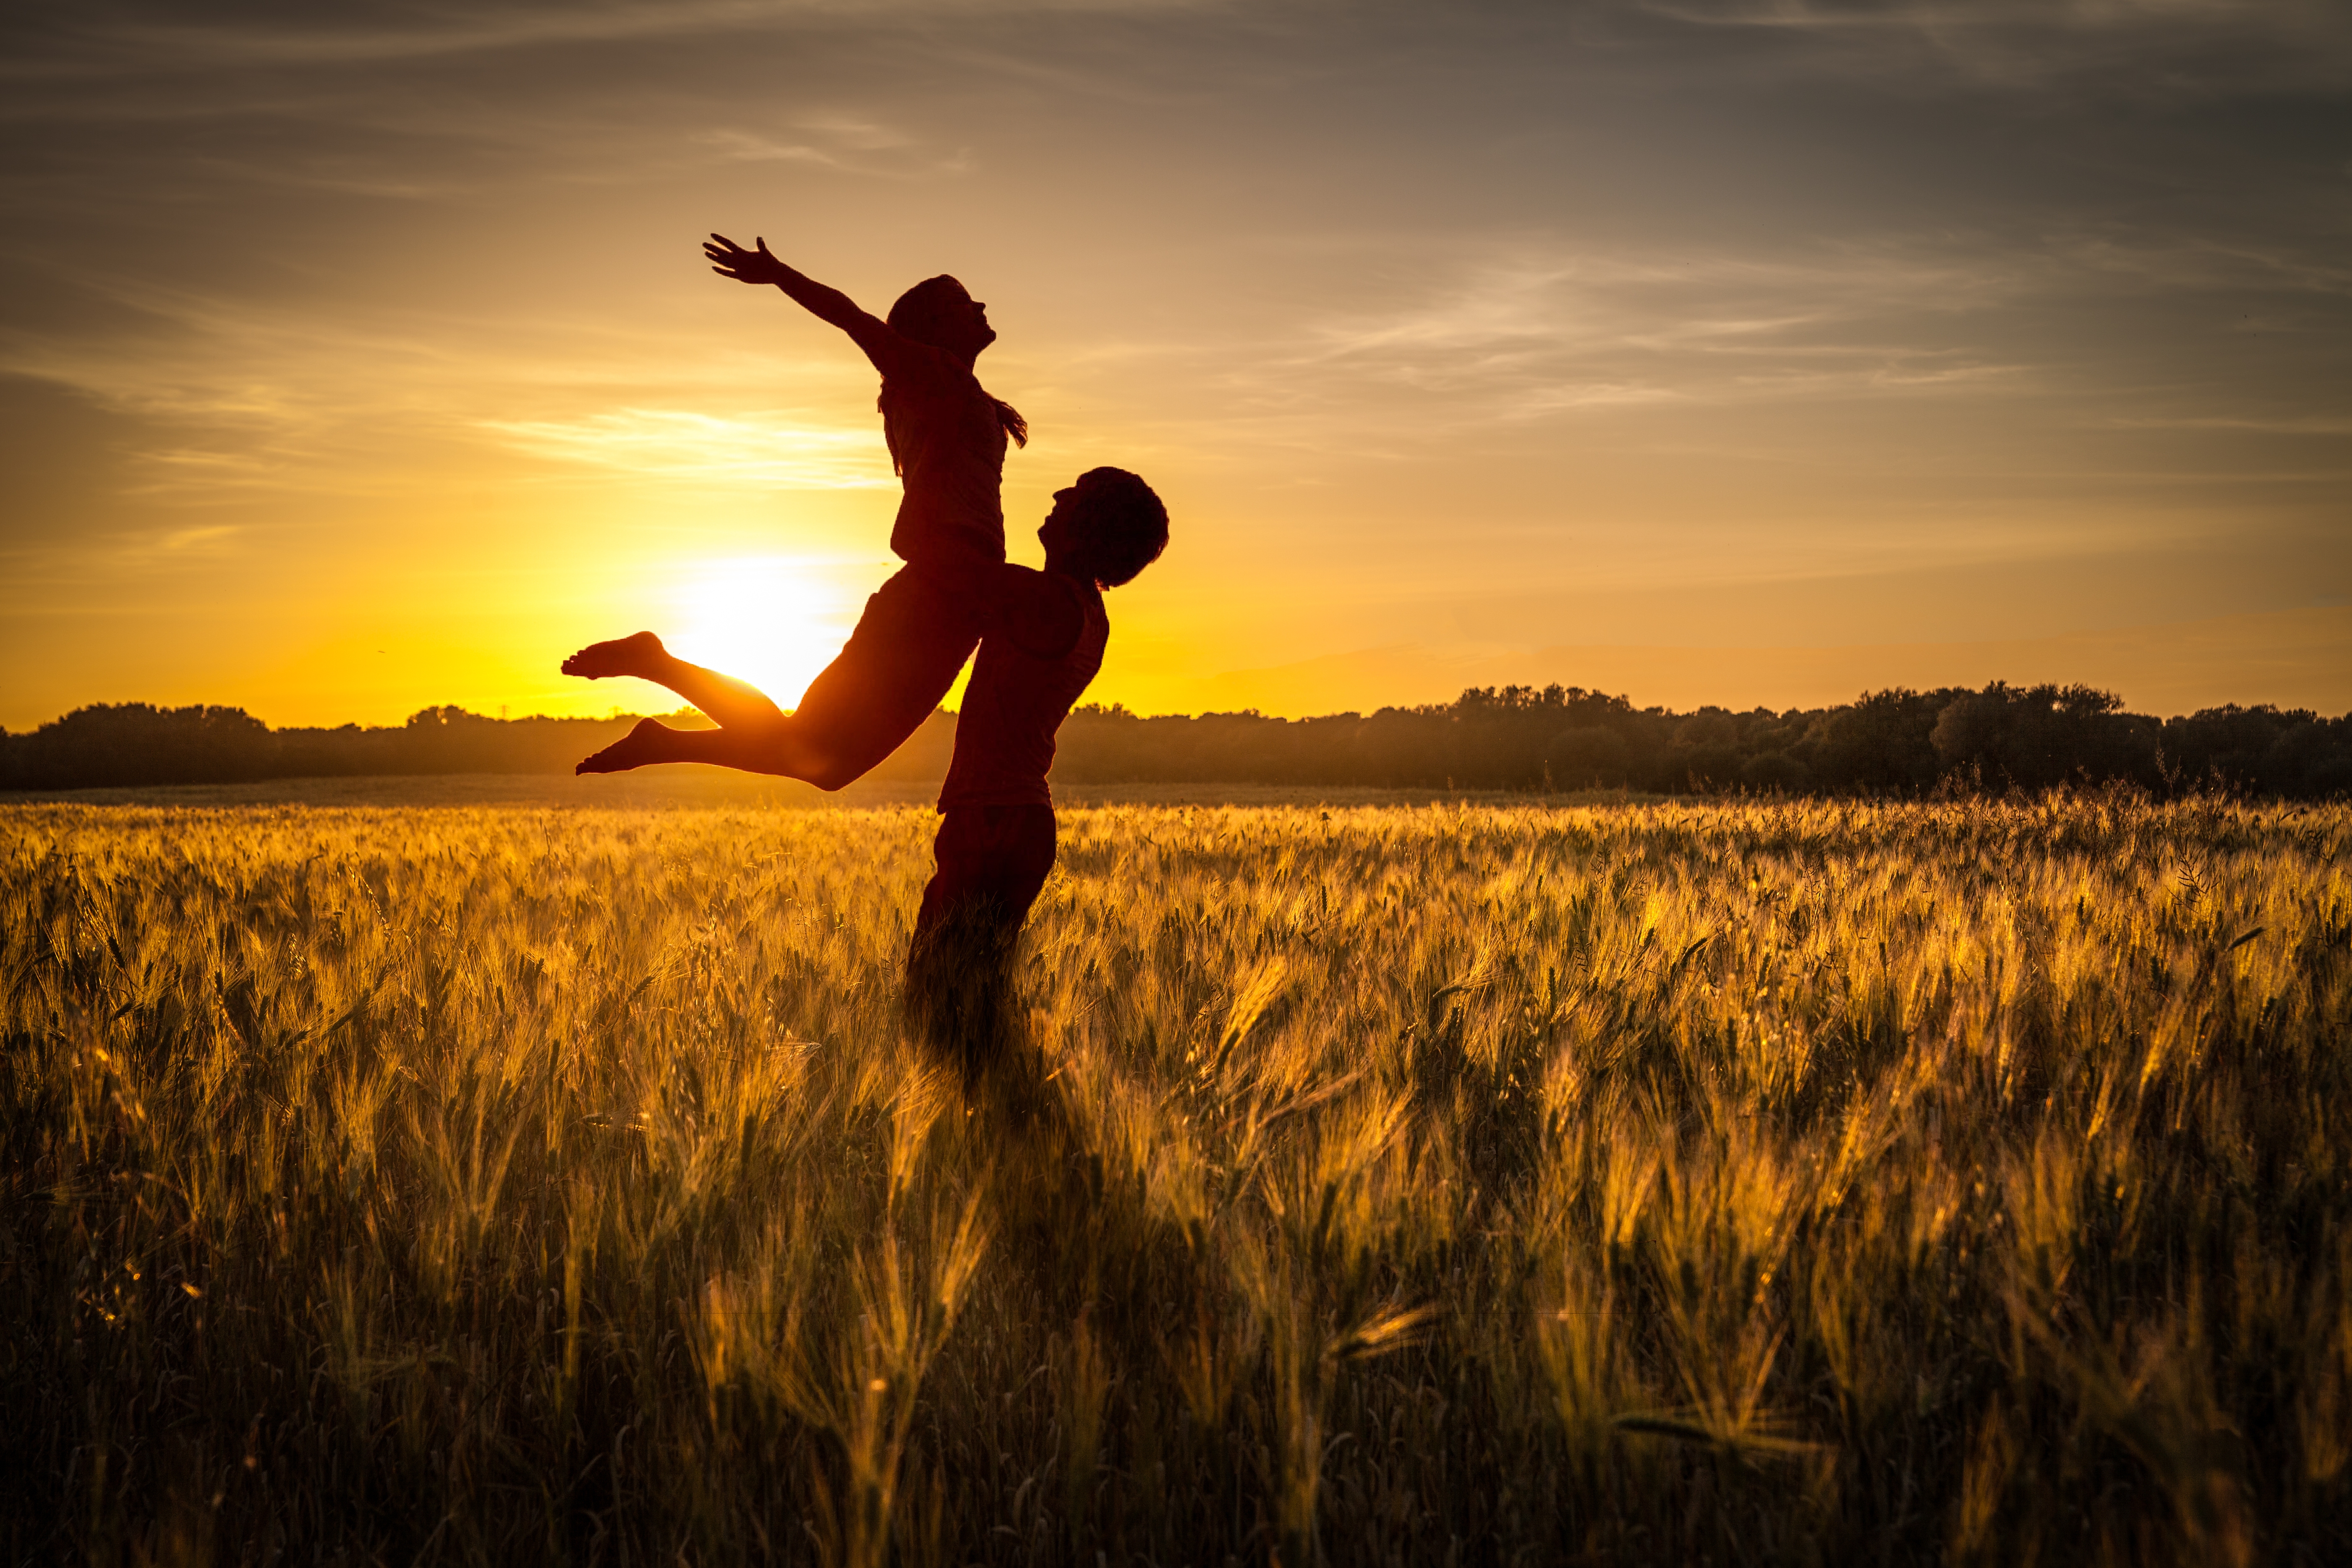 HD wallpaper, Clear Sky, 5K, Lifting, Couple, Evening, Sunset, Silhouette, Together, Field, Romantic